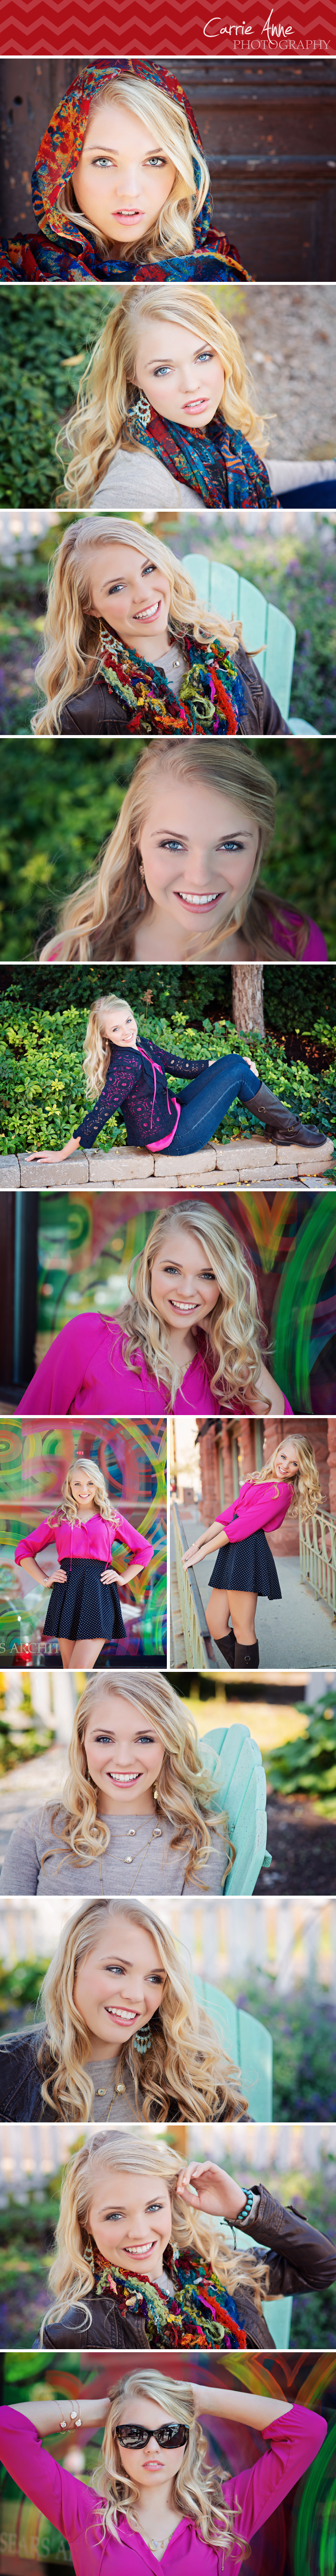 Grand Rapids Senior Photographer, Hip, urban senior sessions, Stunning images by Carrie Anne Photography